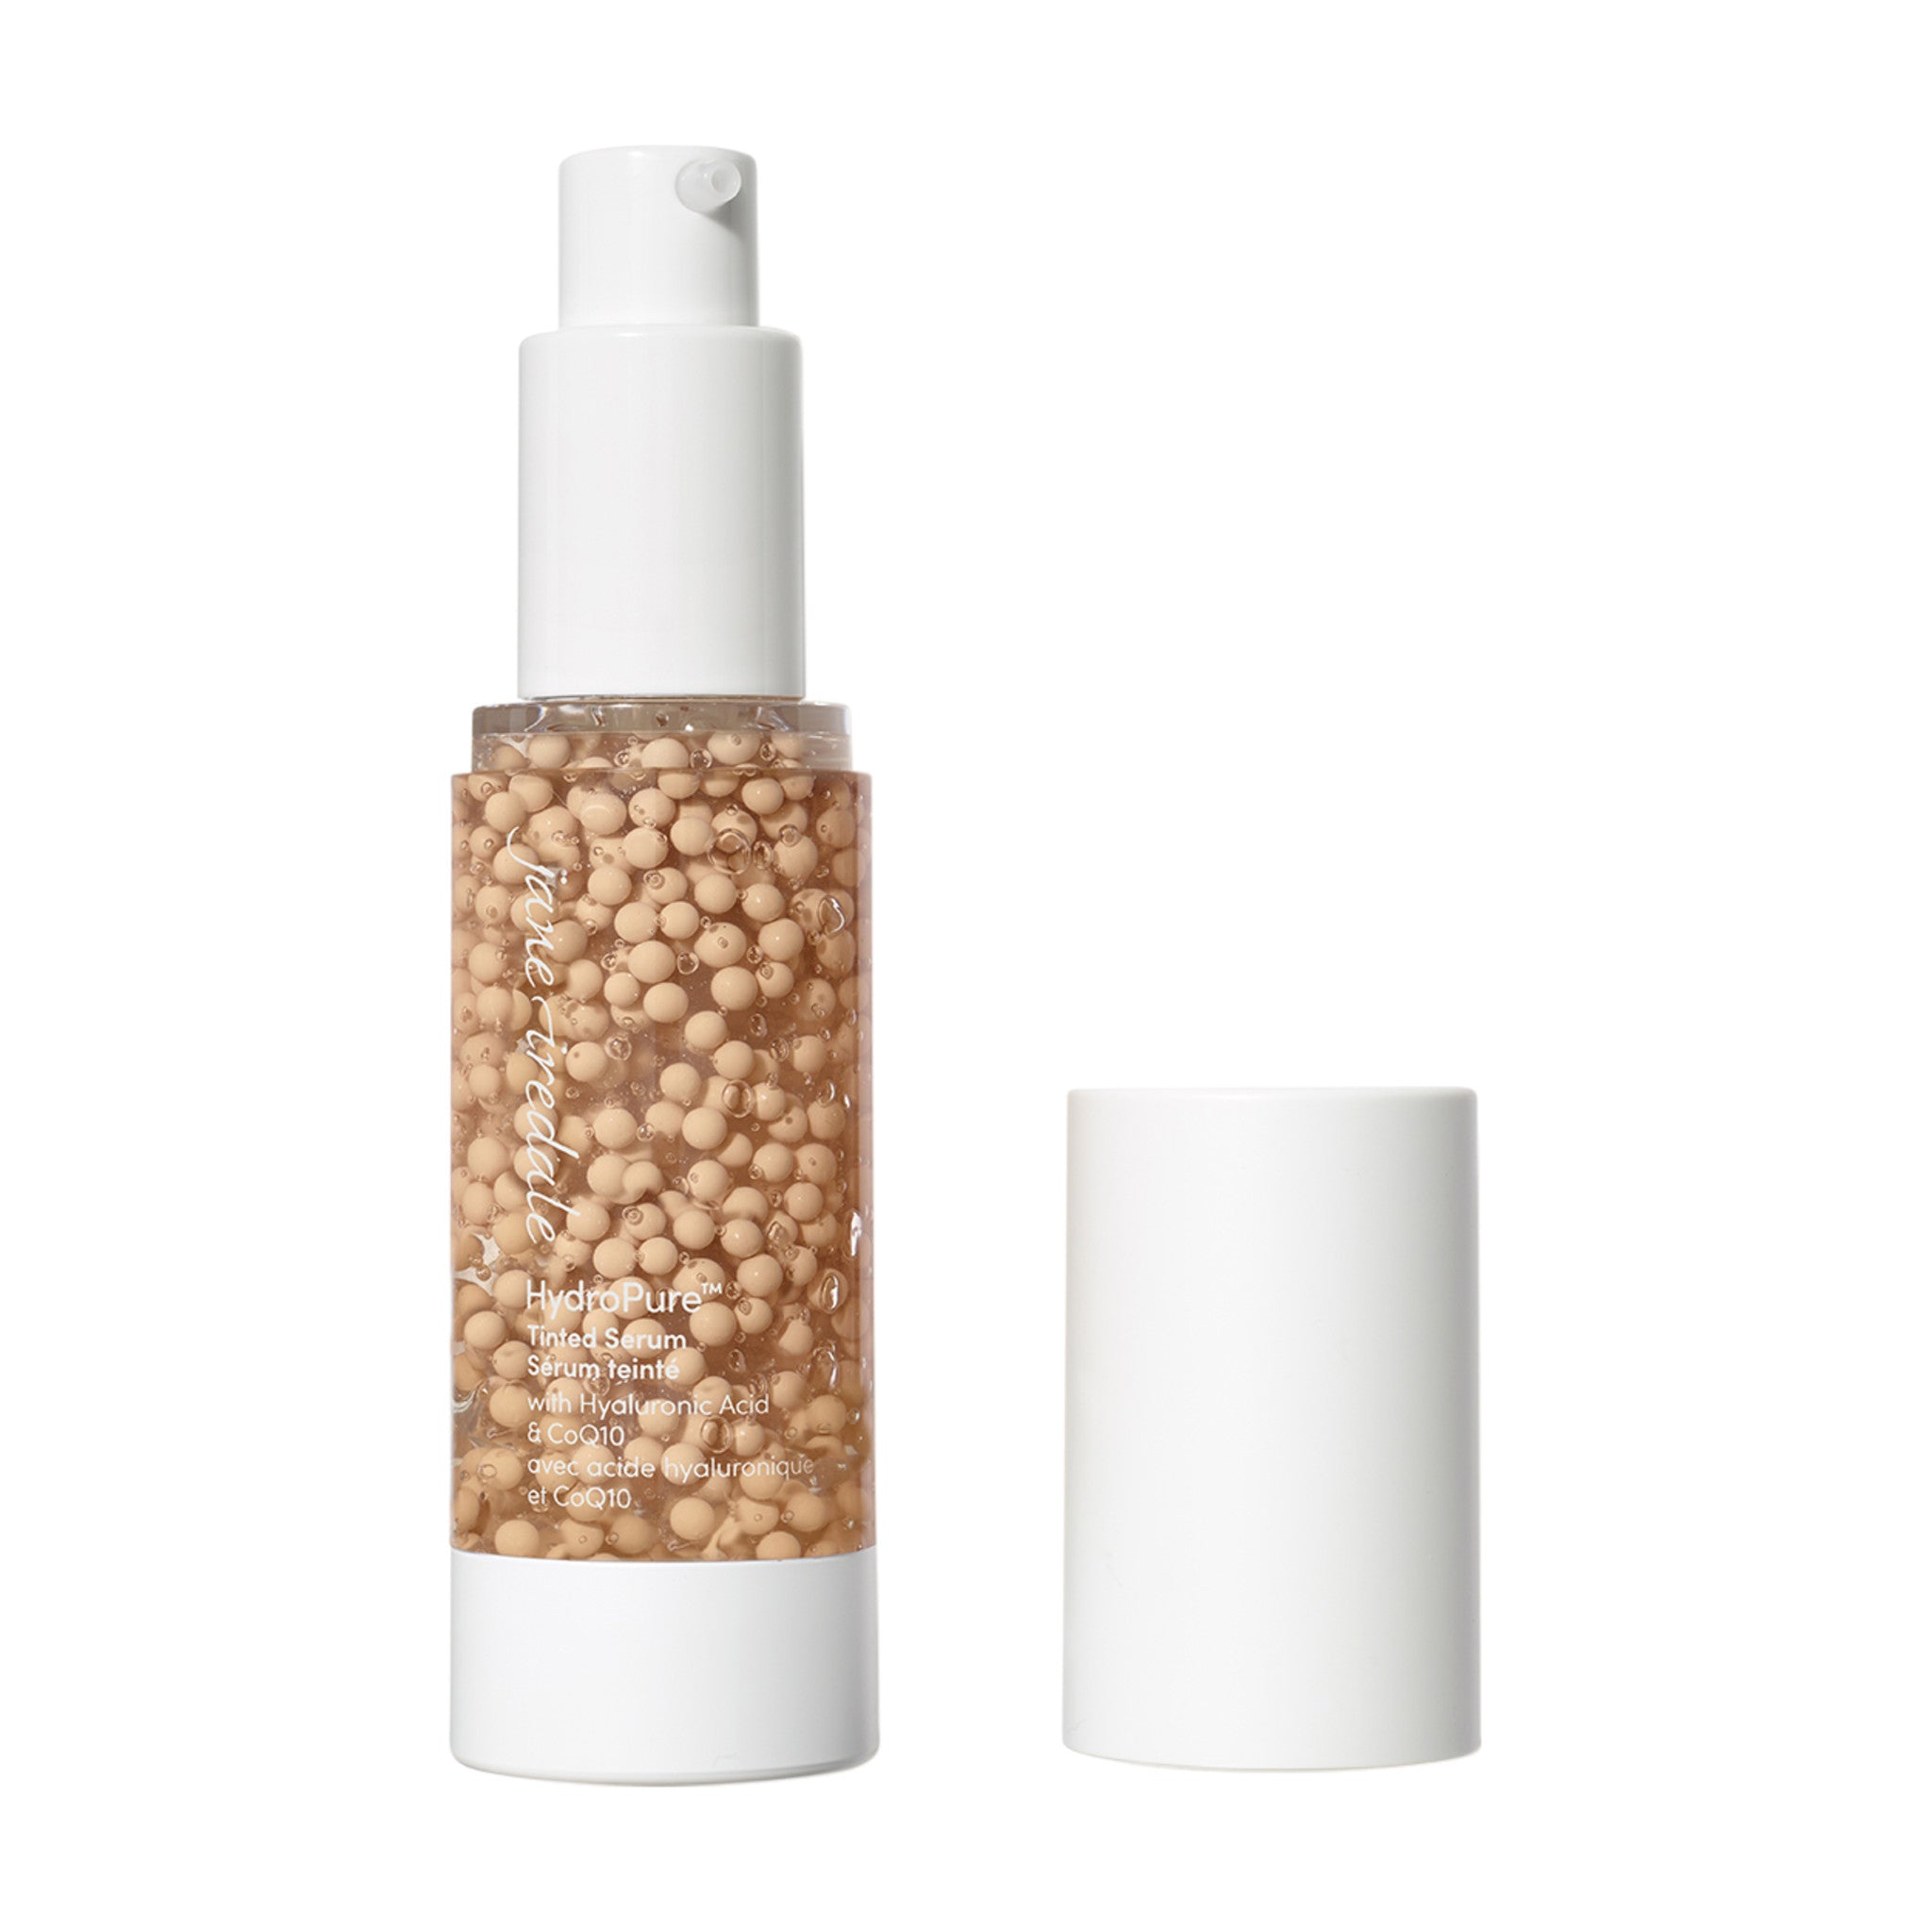 Jane Iredale HydroPure Tinted Serum Color/Shade variant: Fair 1 main image. This product is for light complexions